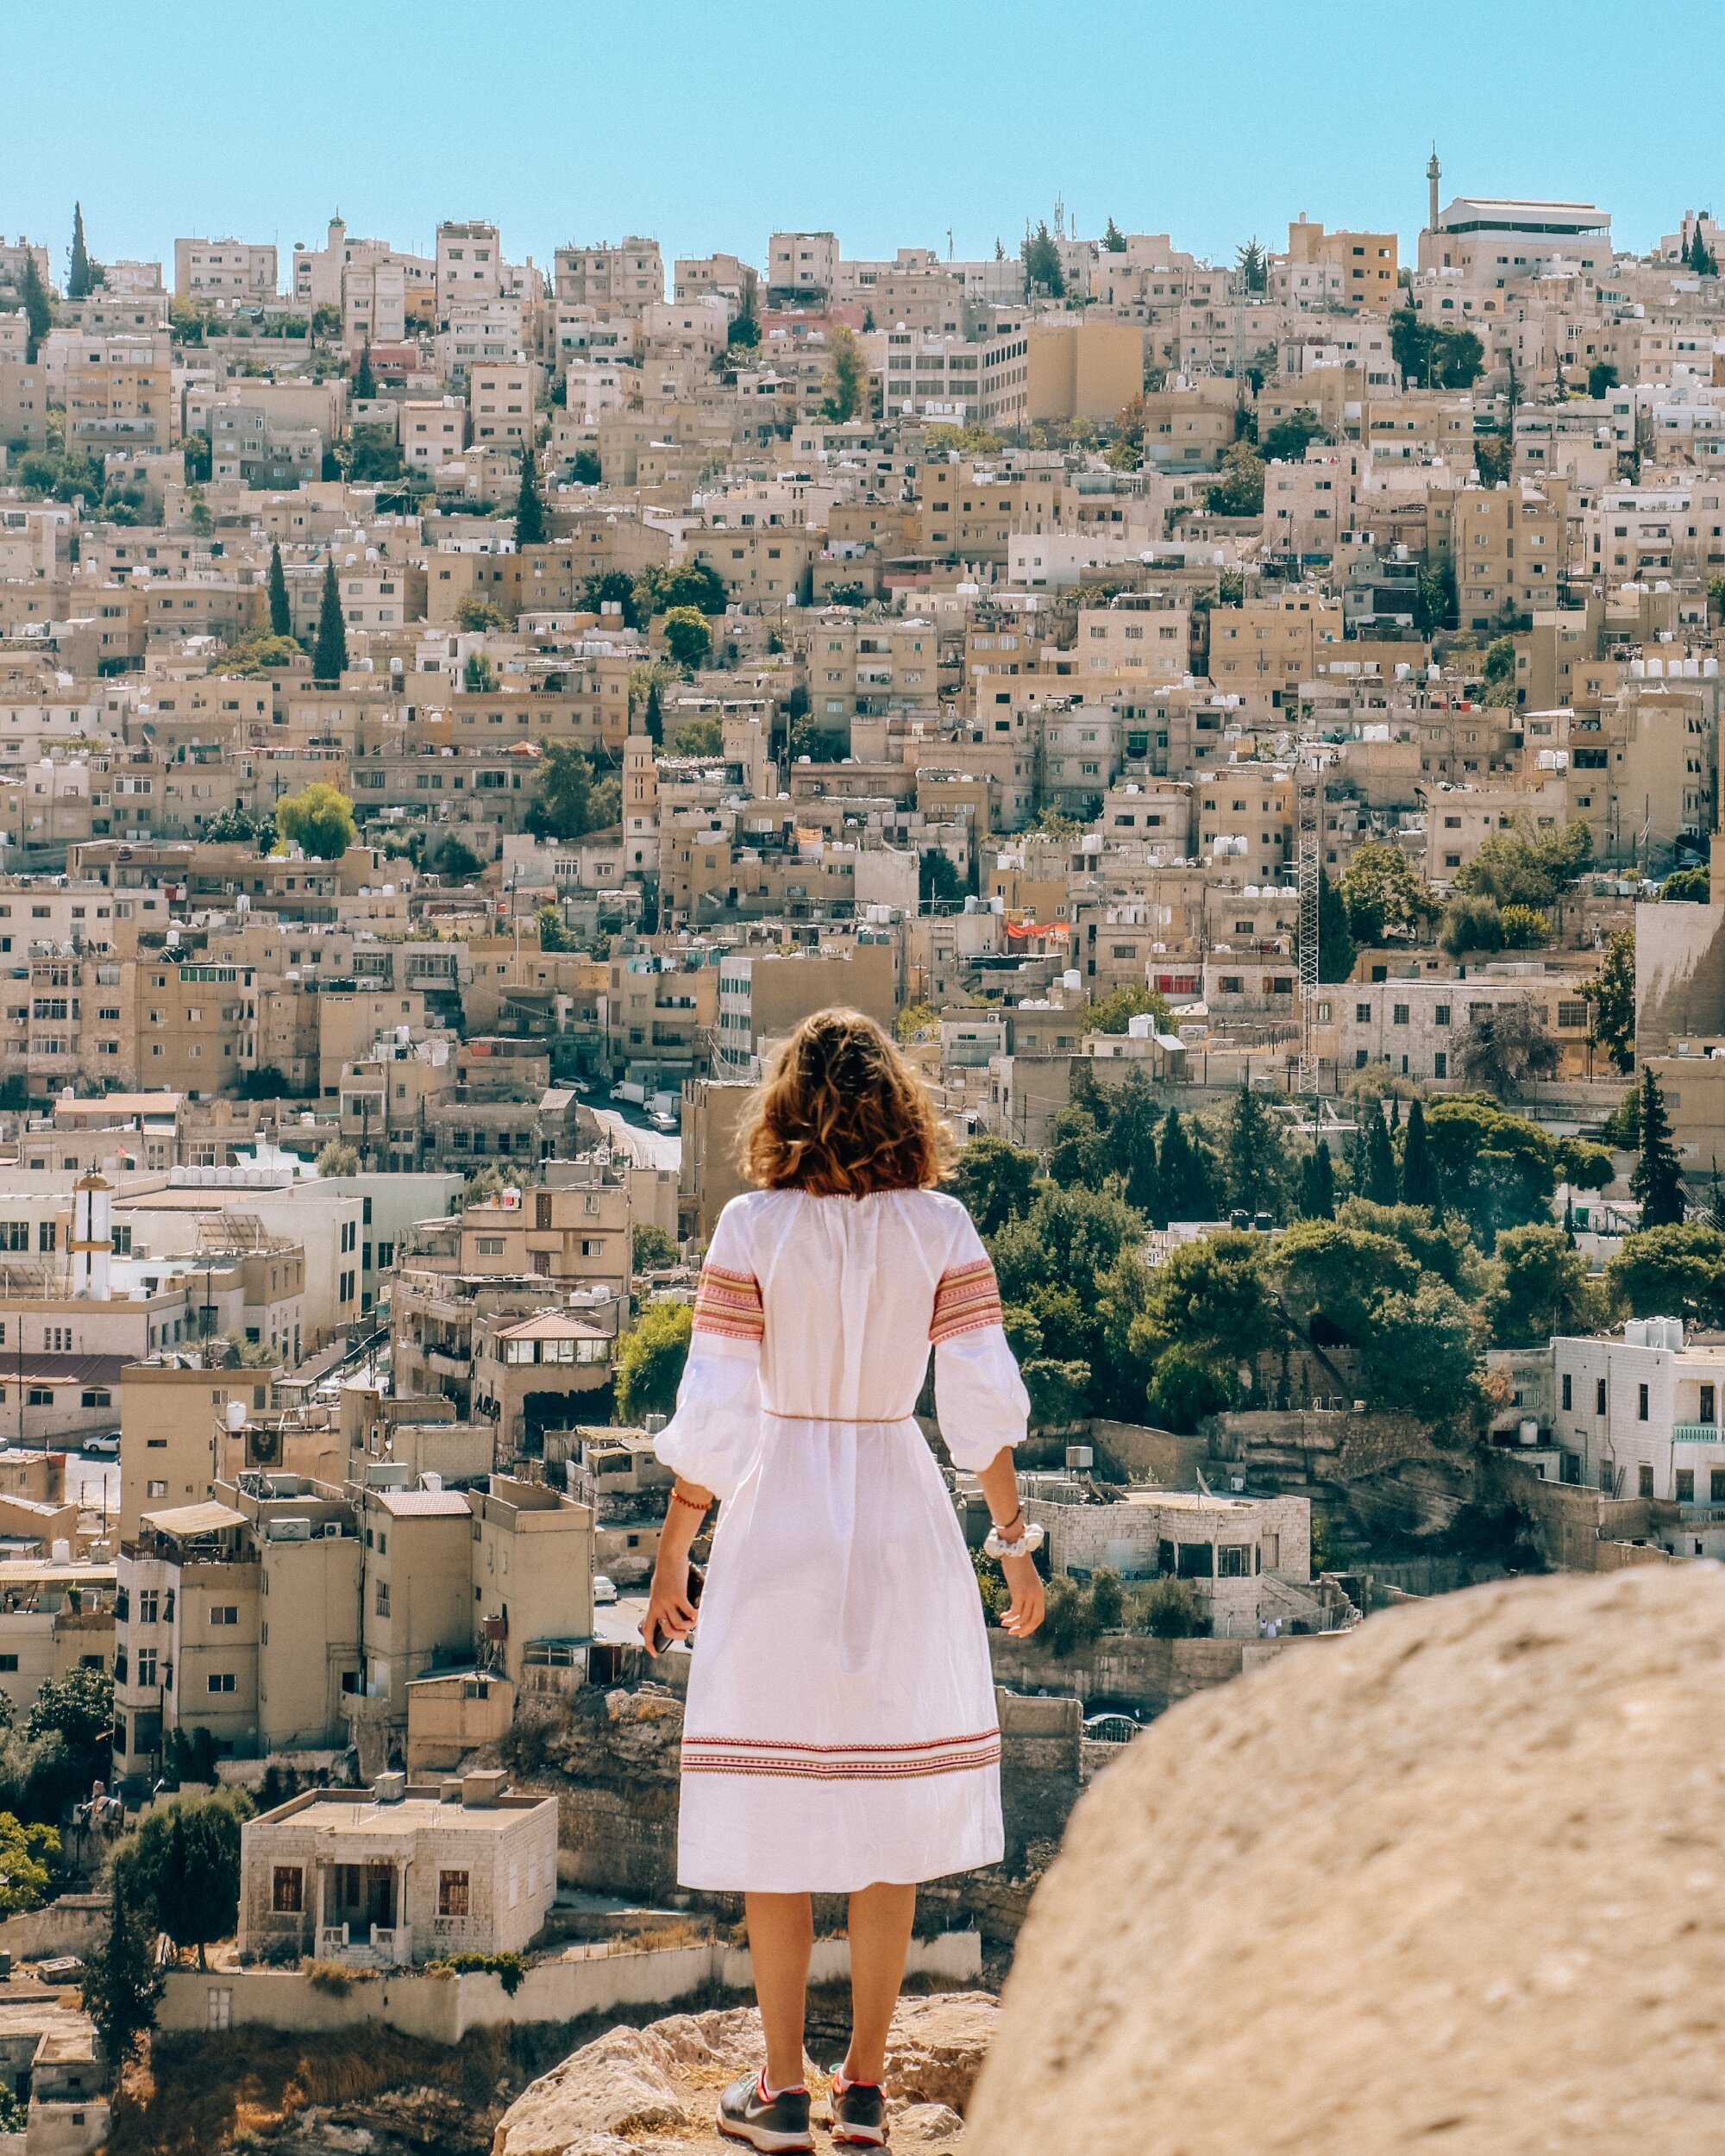 A One Week Itinerary for Jordan